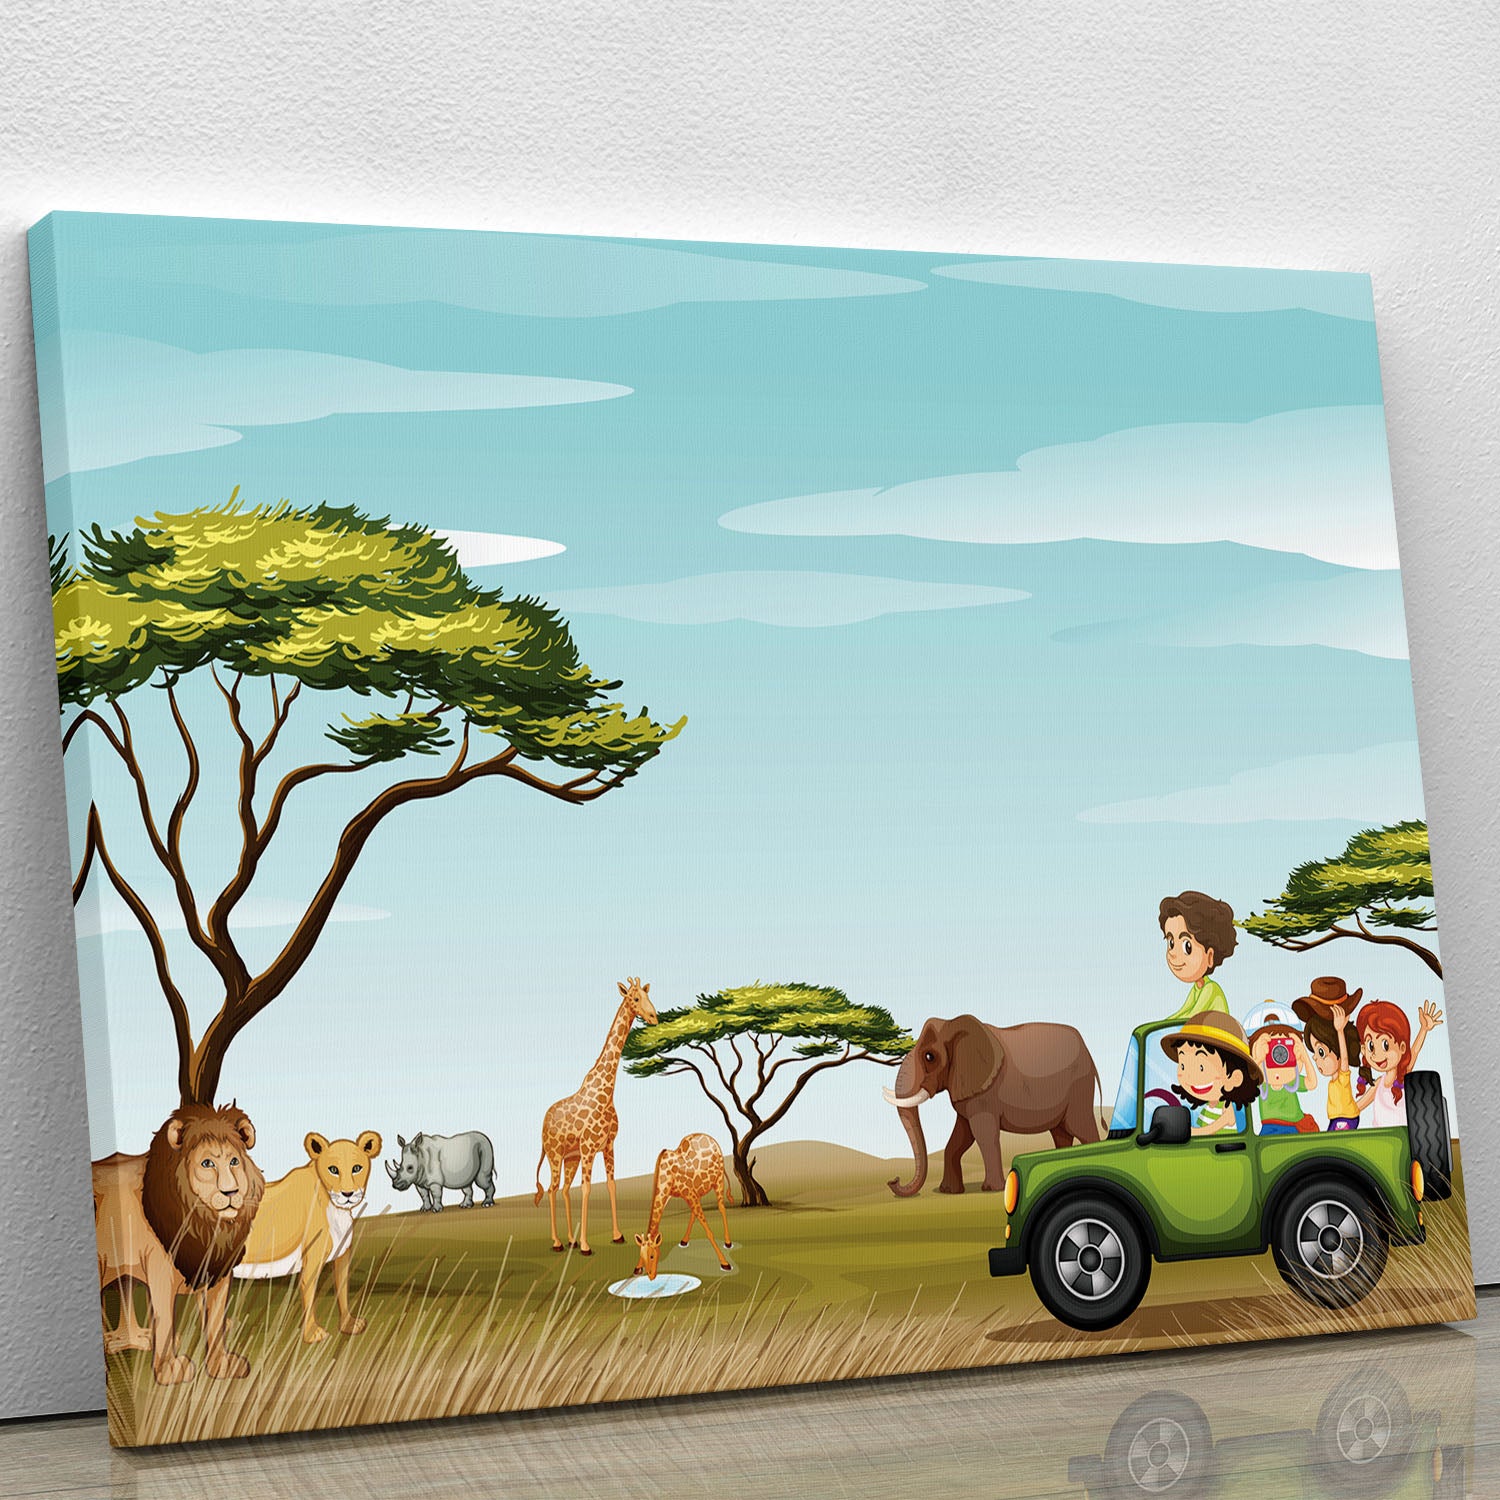 Roadtrip in the field full of animals Canvas Print or Poster - Canvas Art Rocks - 1